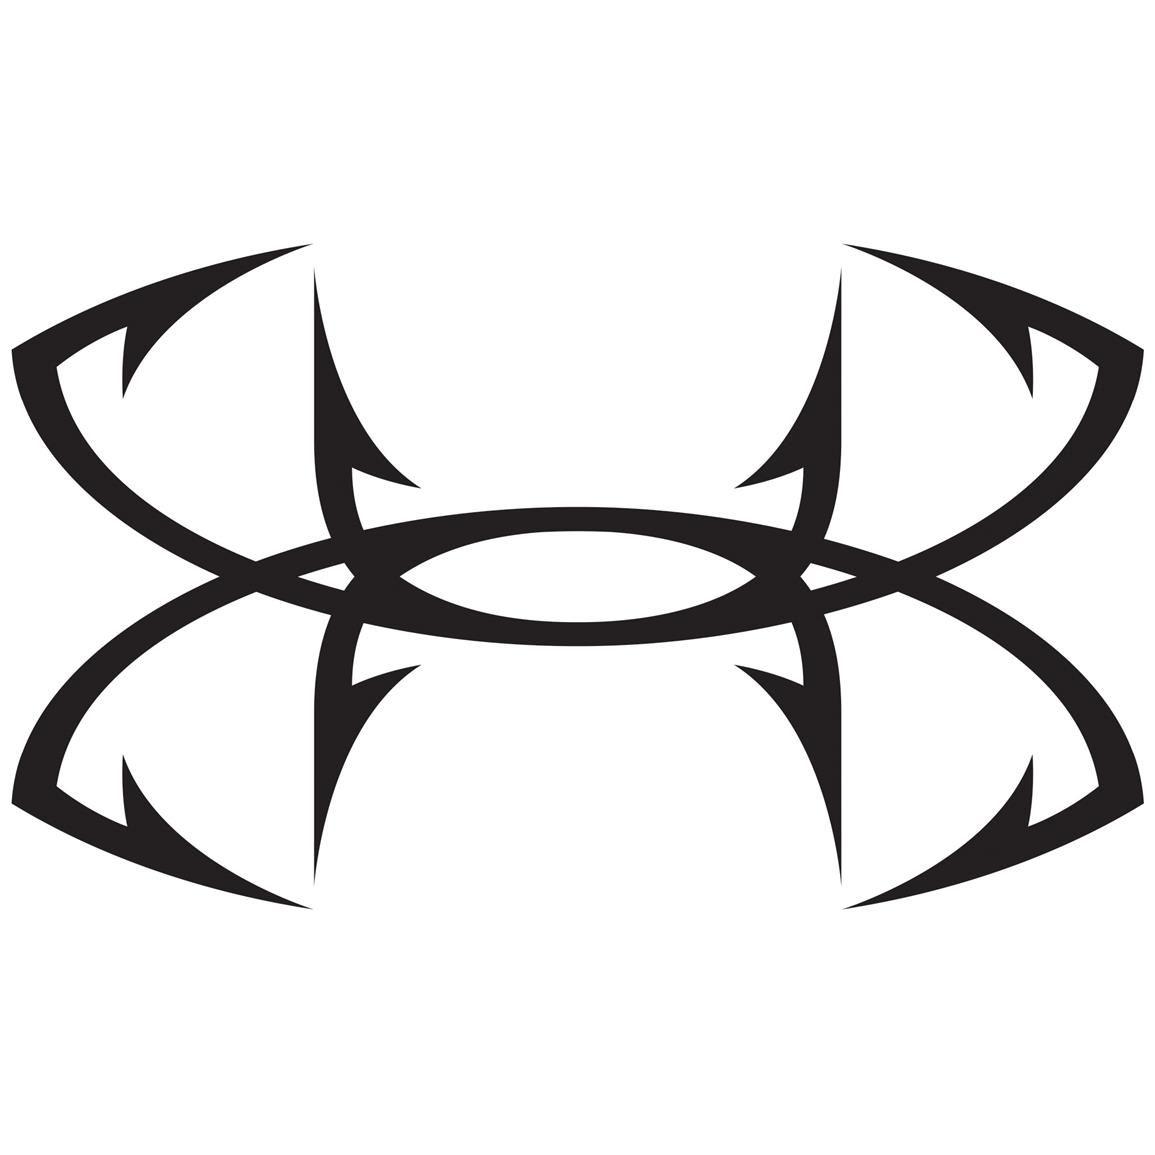 Under Armour Hunting Logo - Under Armour 12 Vinyl Decal - at Sportsman's Guide